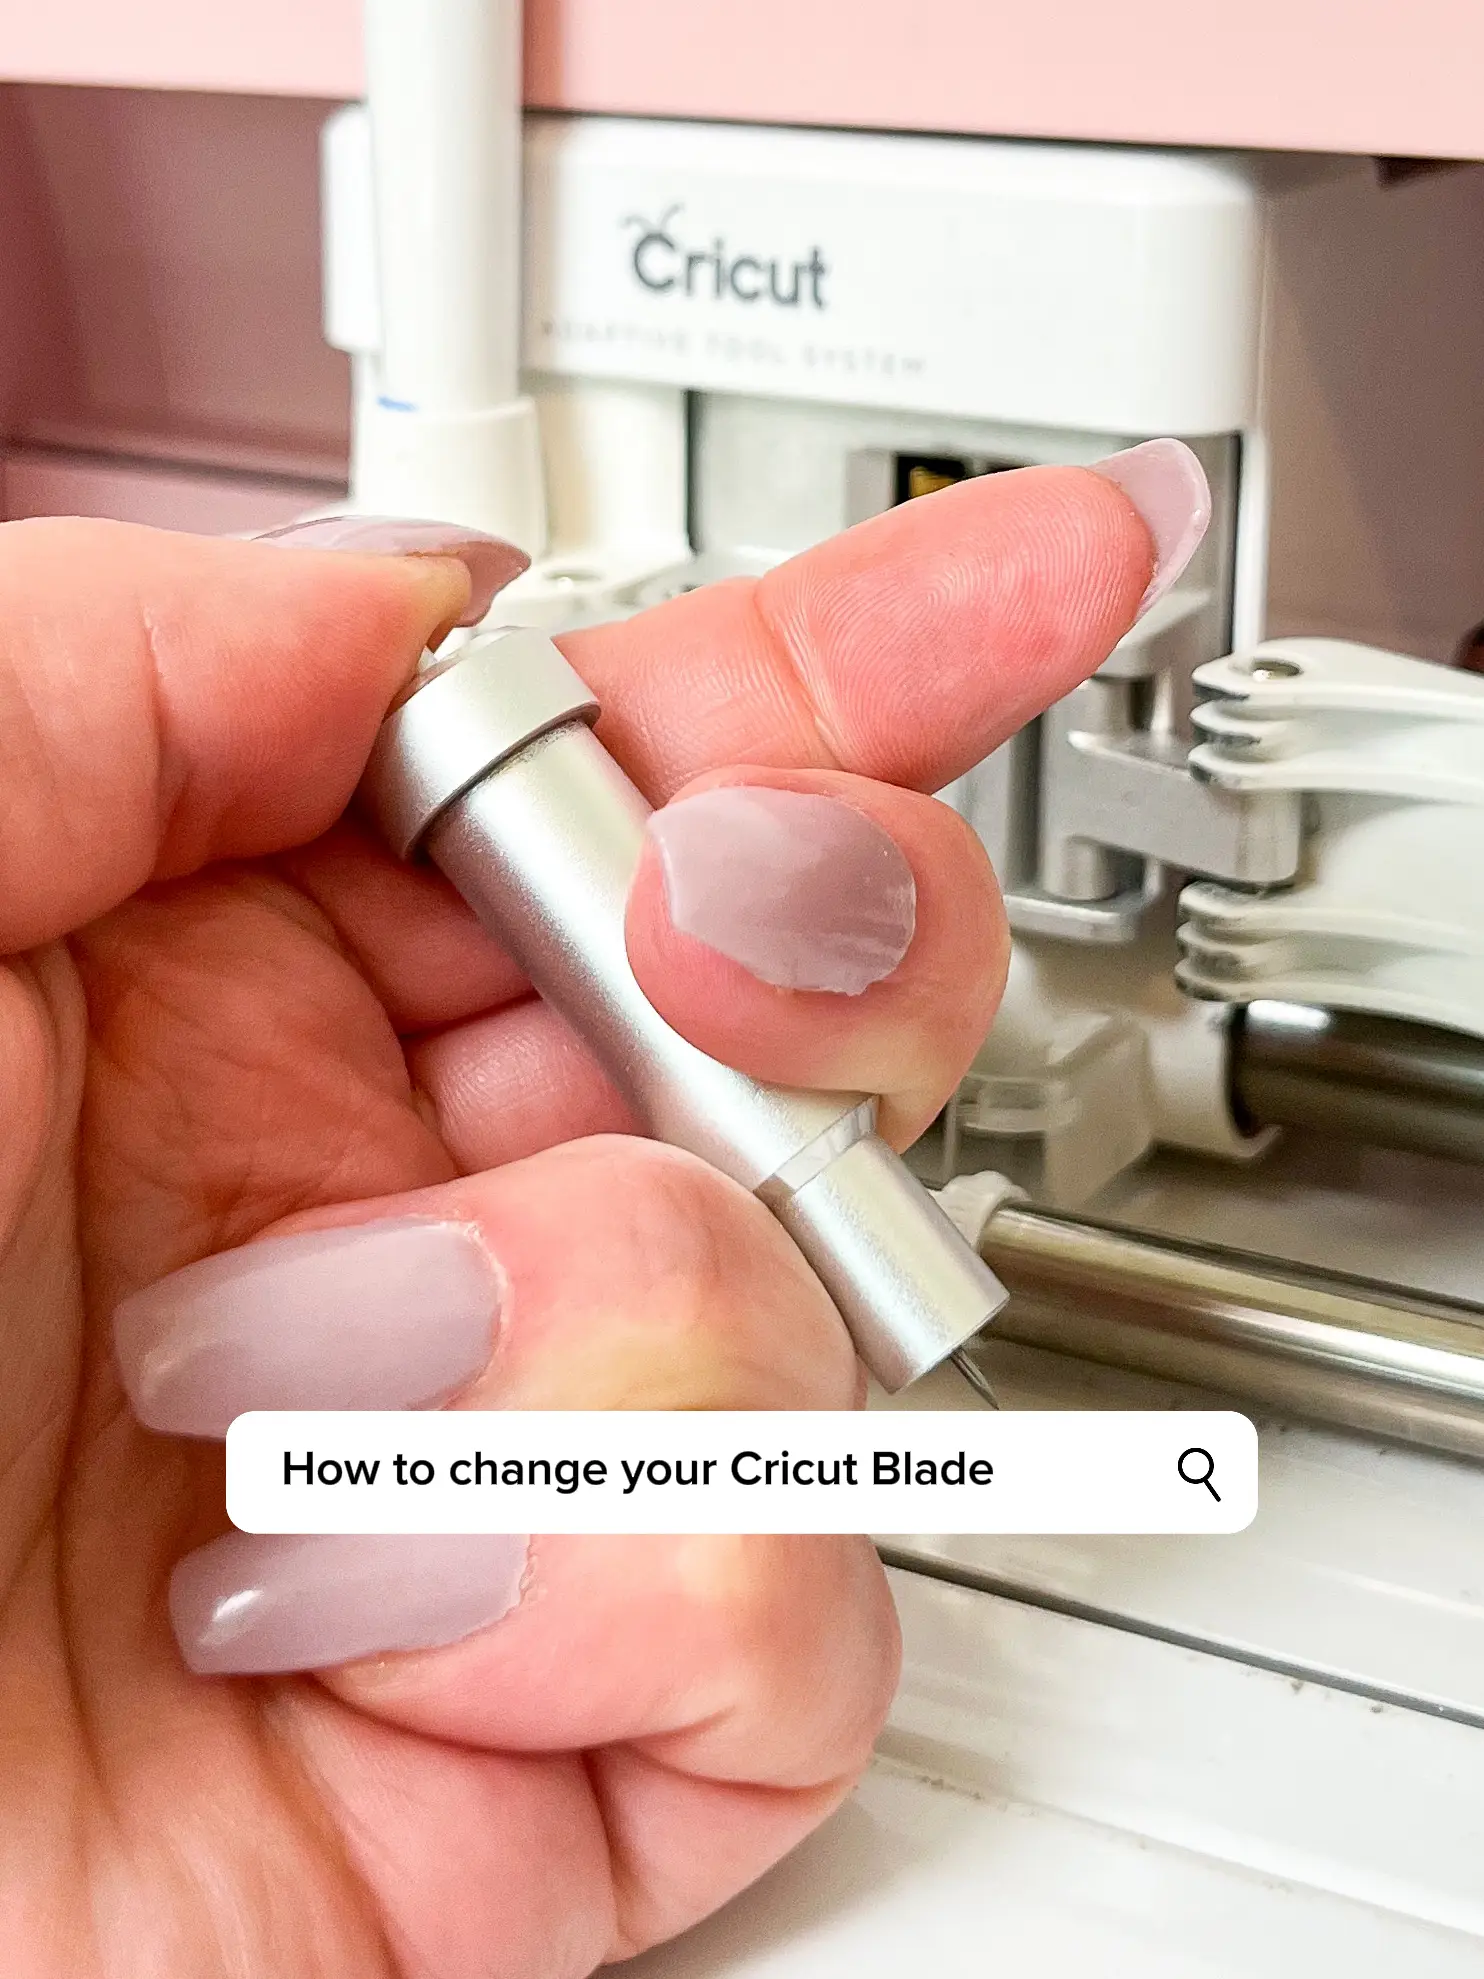 How to Change Cricut Maker Blades - The Simple Way 